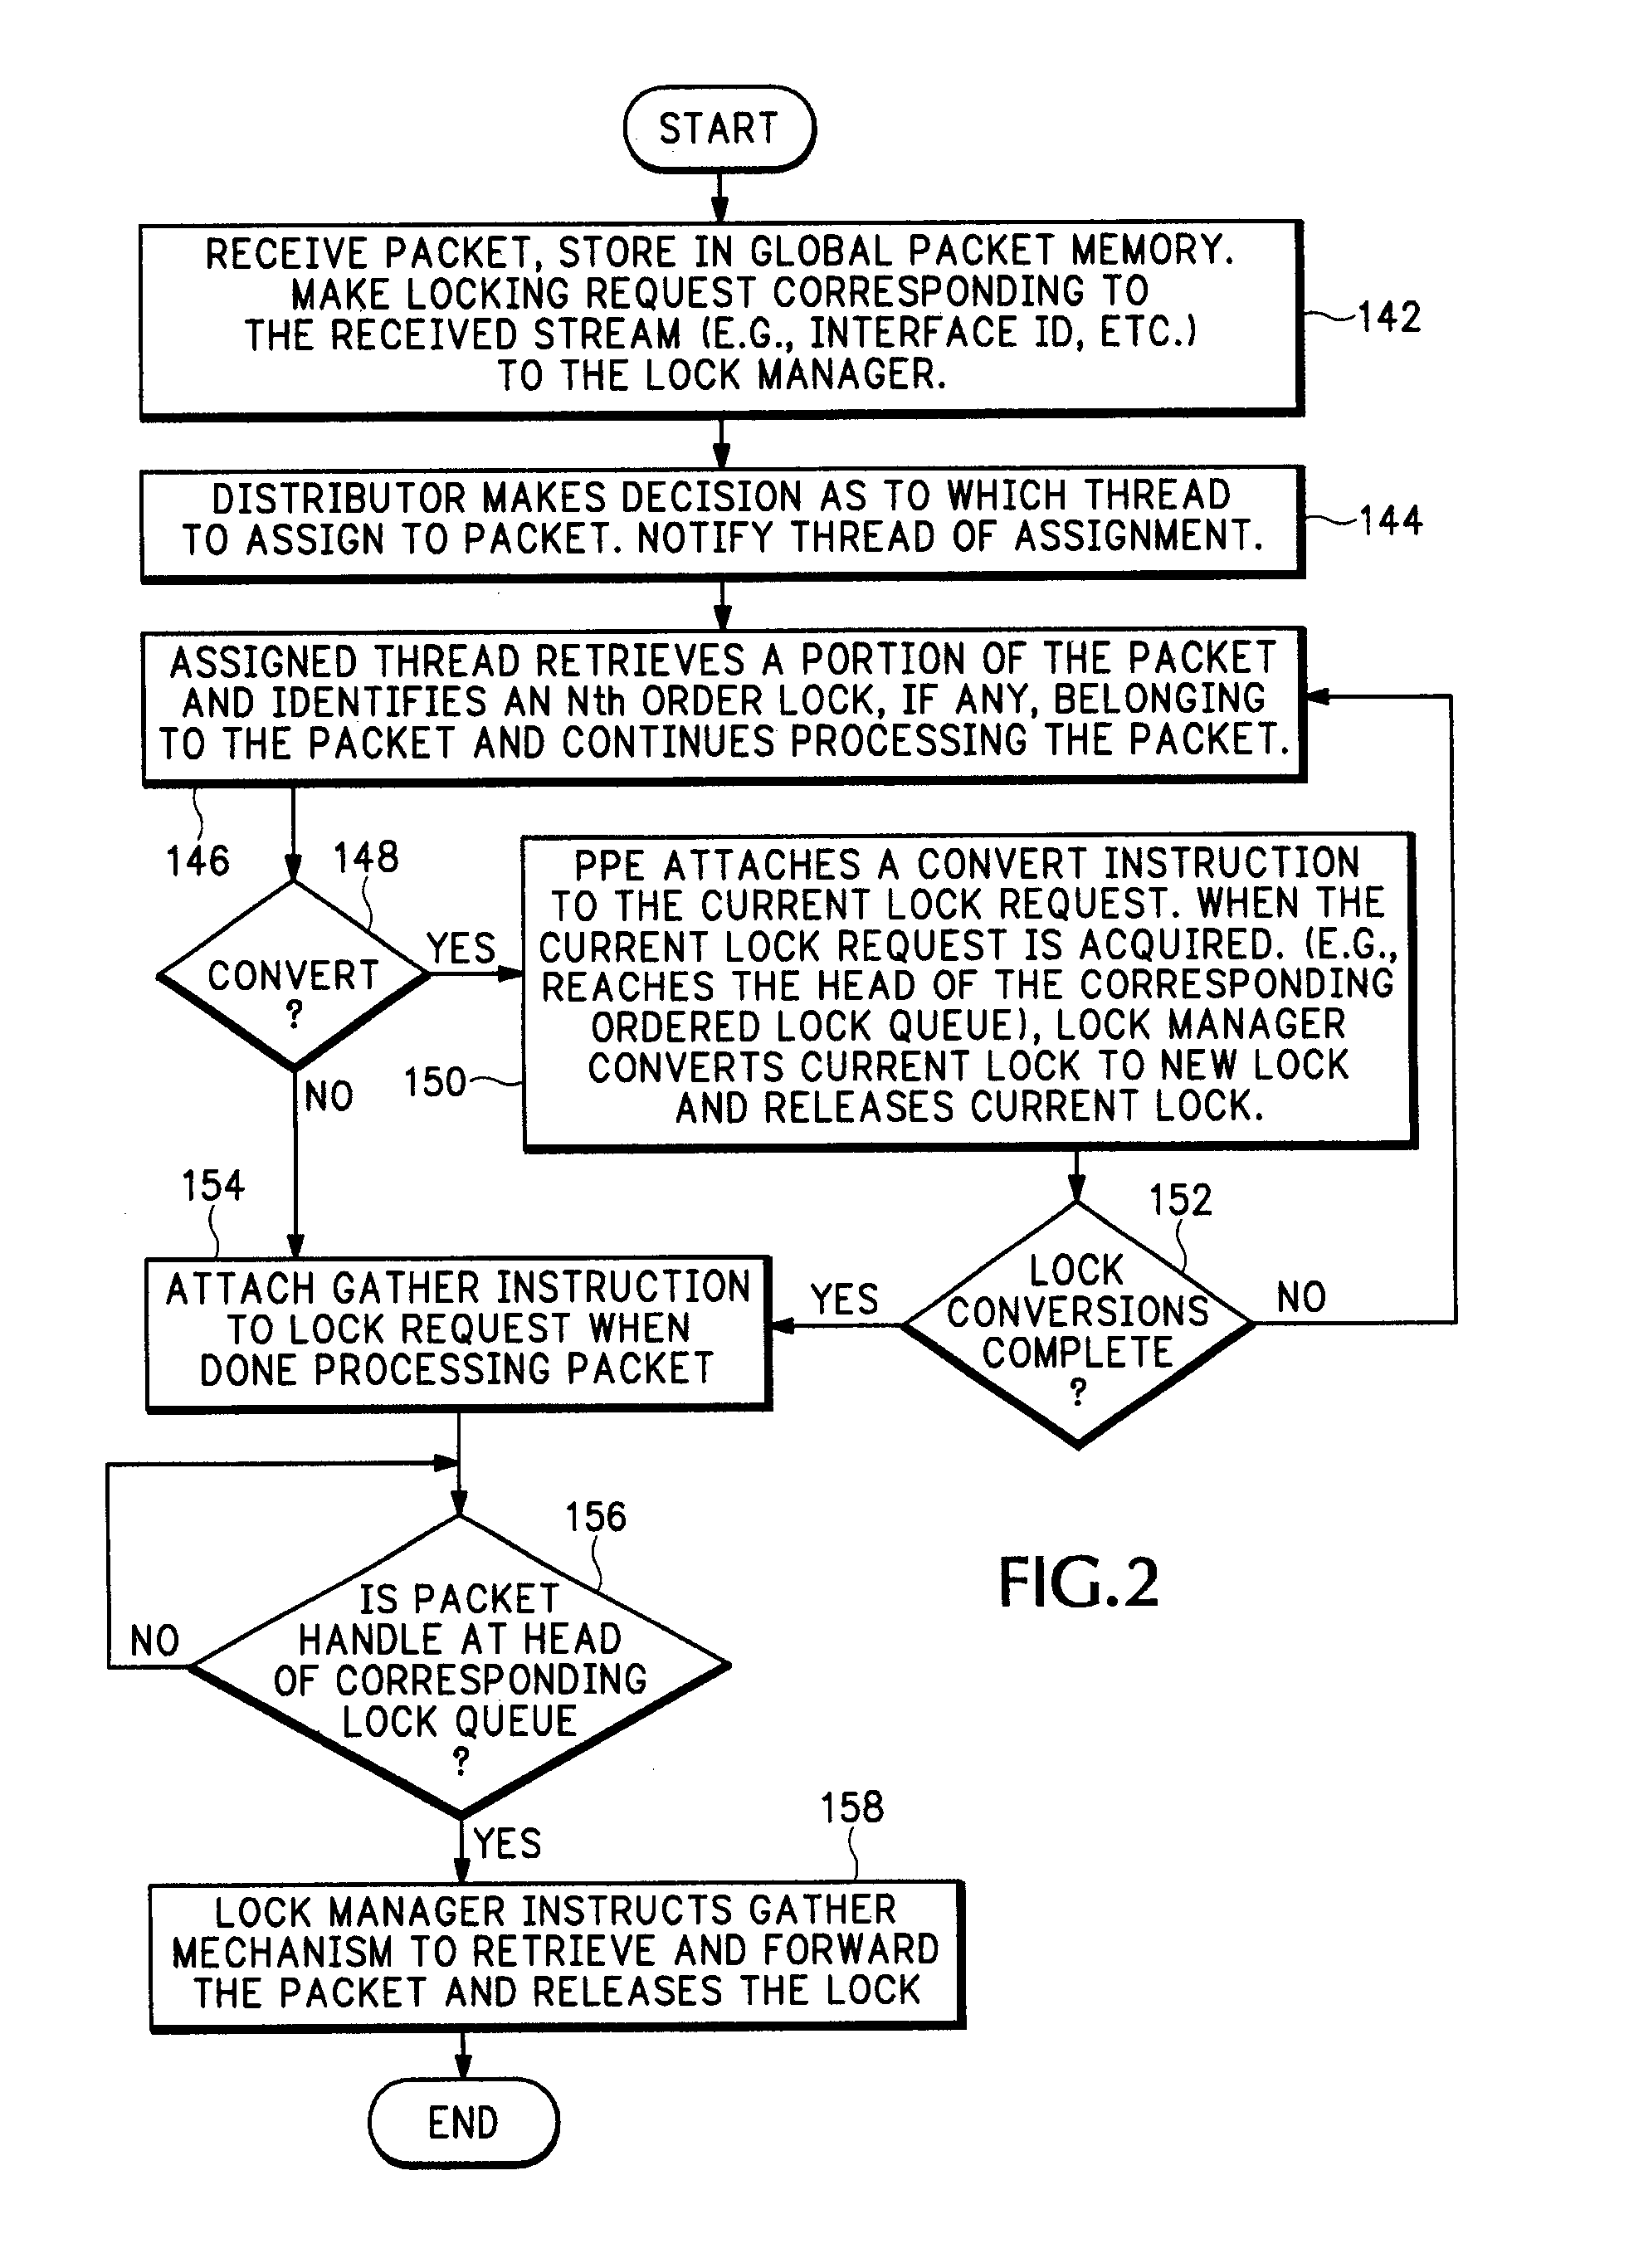 Multi-threaded packet processing architecture with global packet memory, packet recirculation, and coprocessor